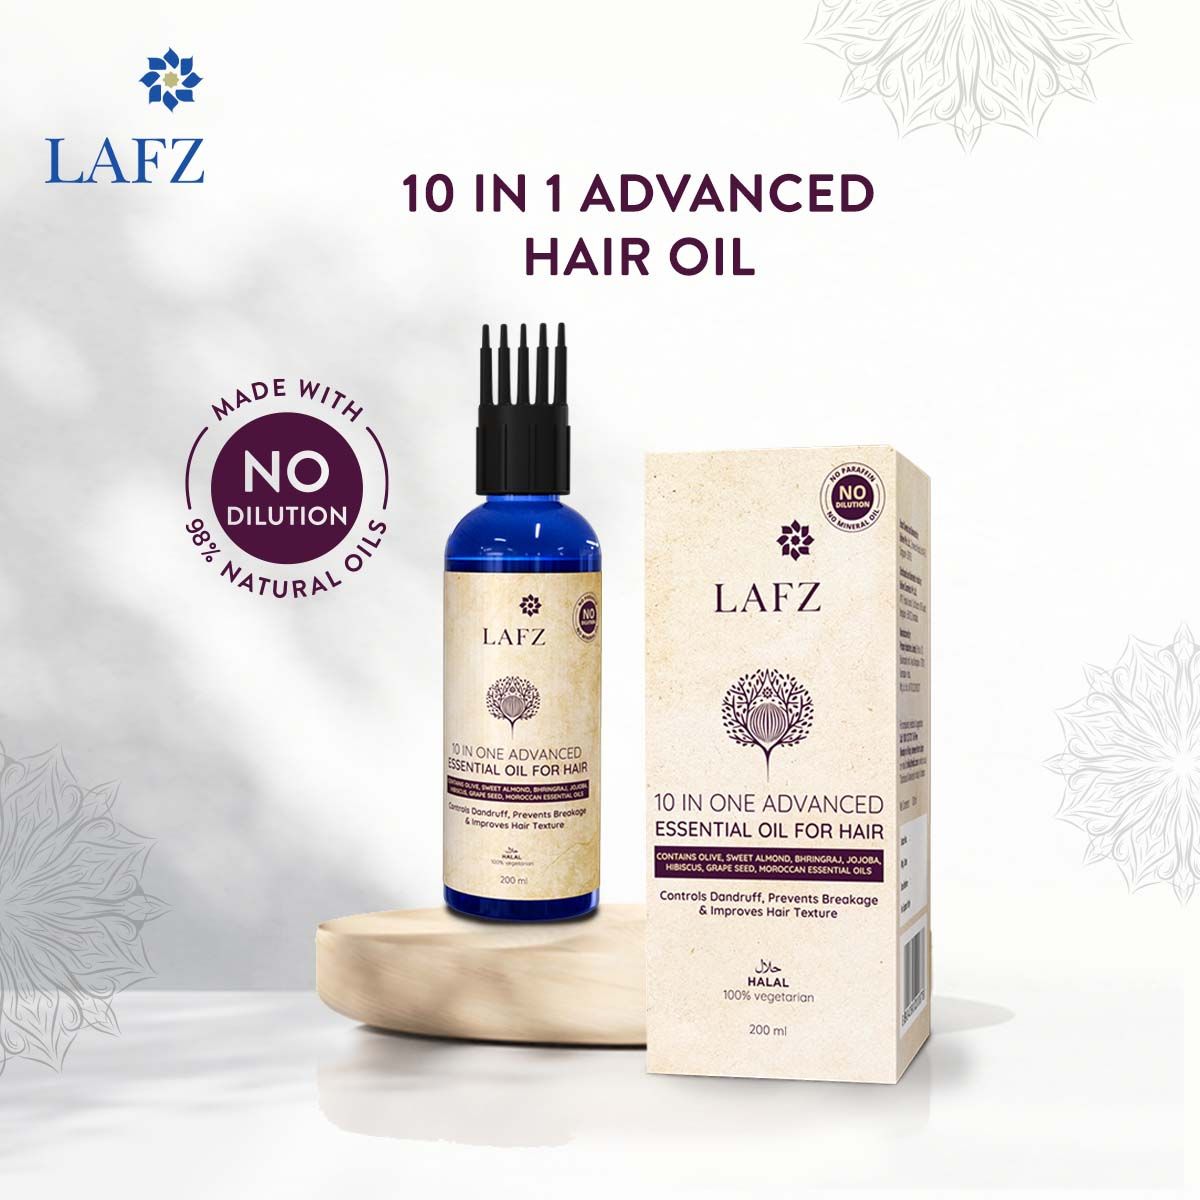 lafz-10-in-1-advanced-essential-oil-for-hair